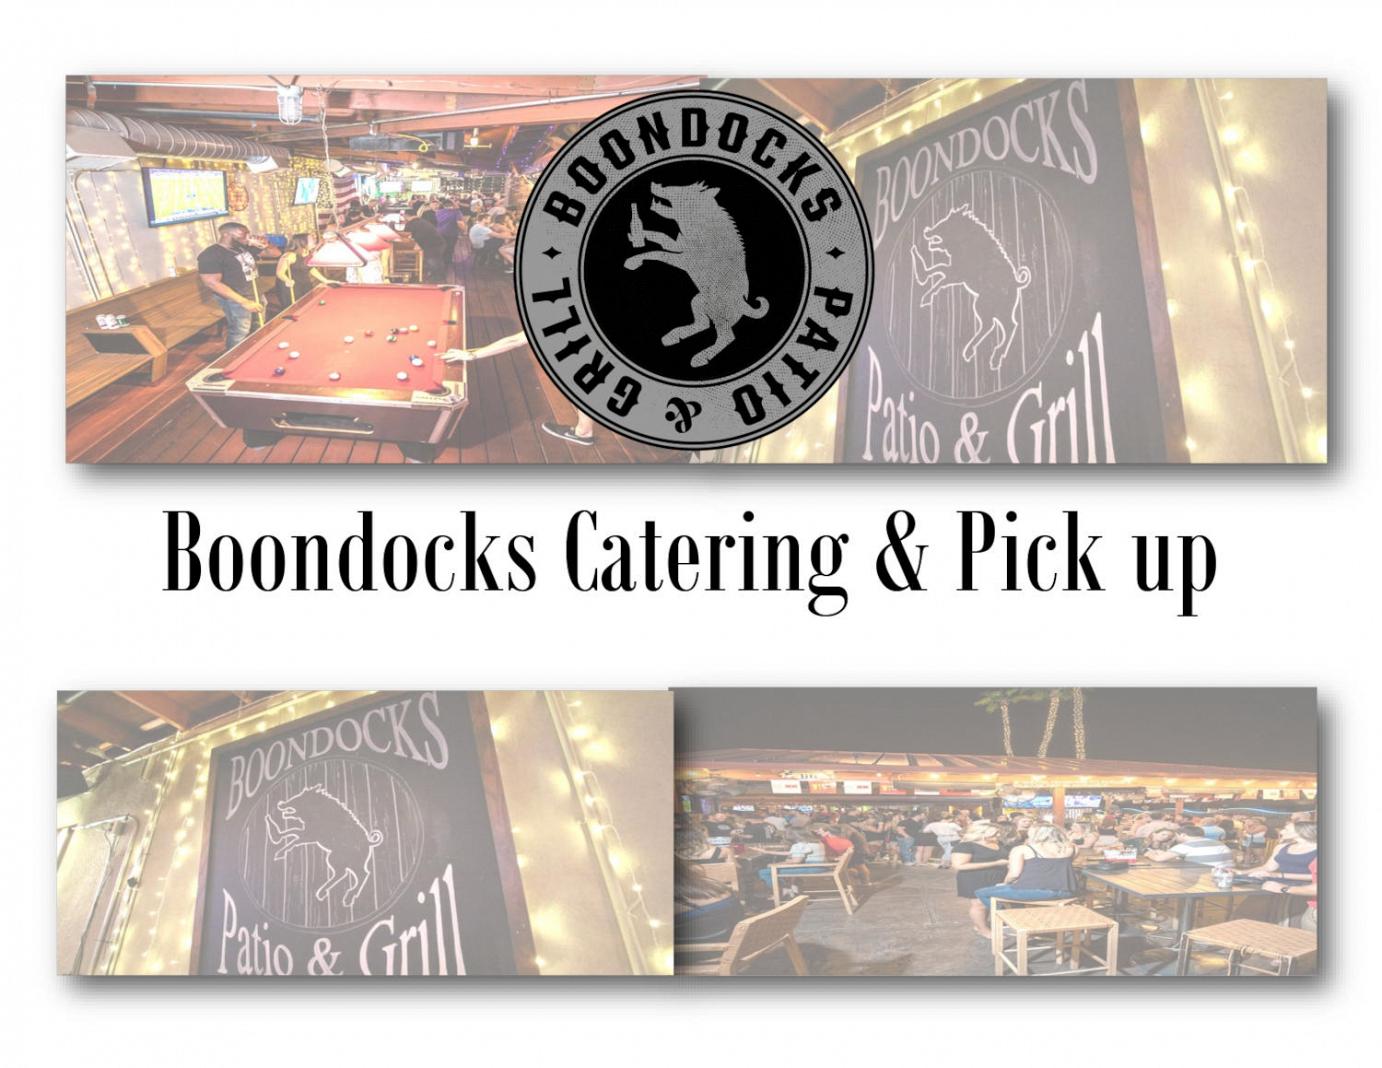 Boondocks Catering & Pick up